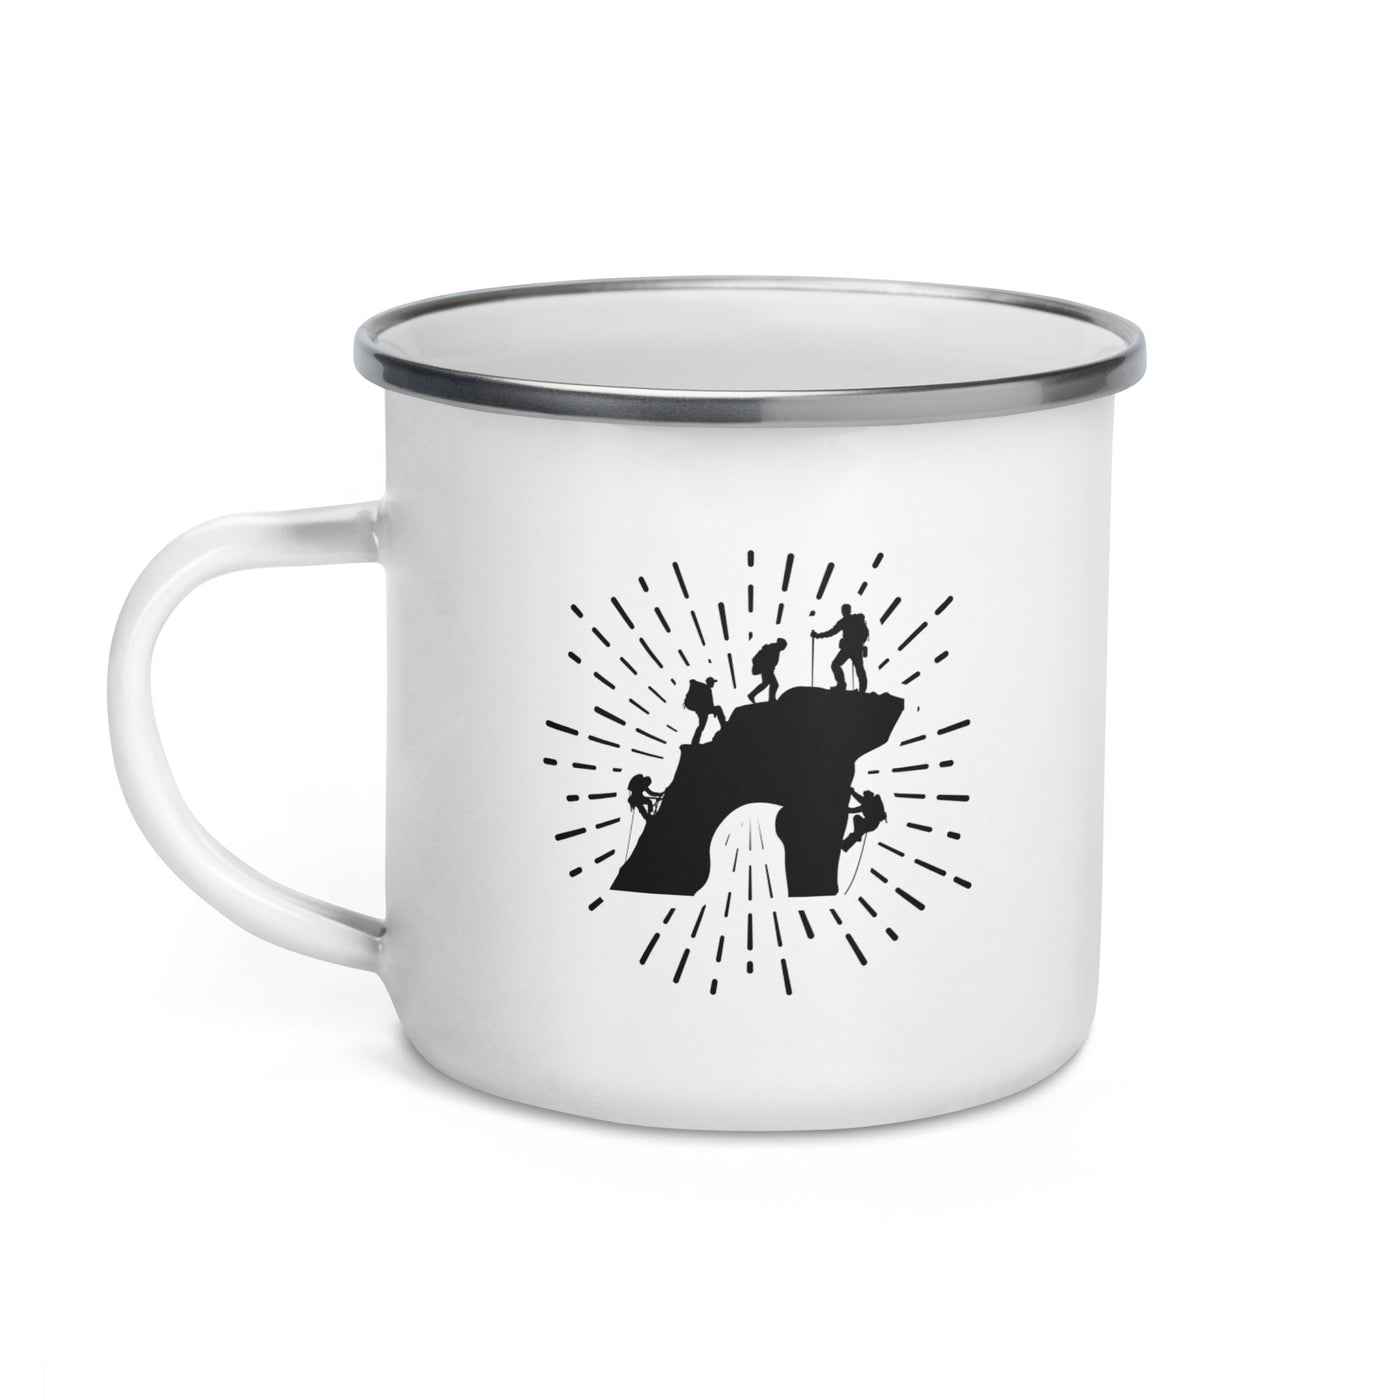 Firework And Climbing - Emaille Tasse klettern